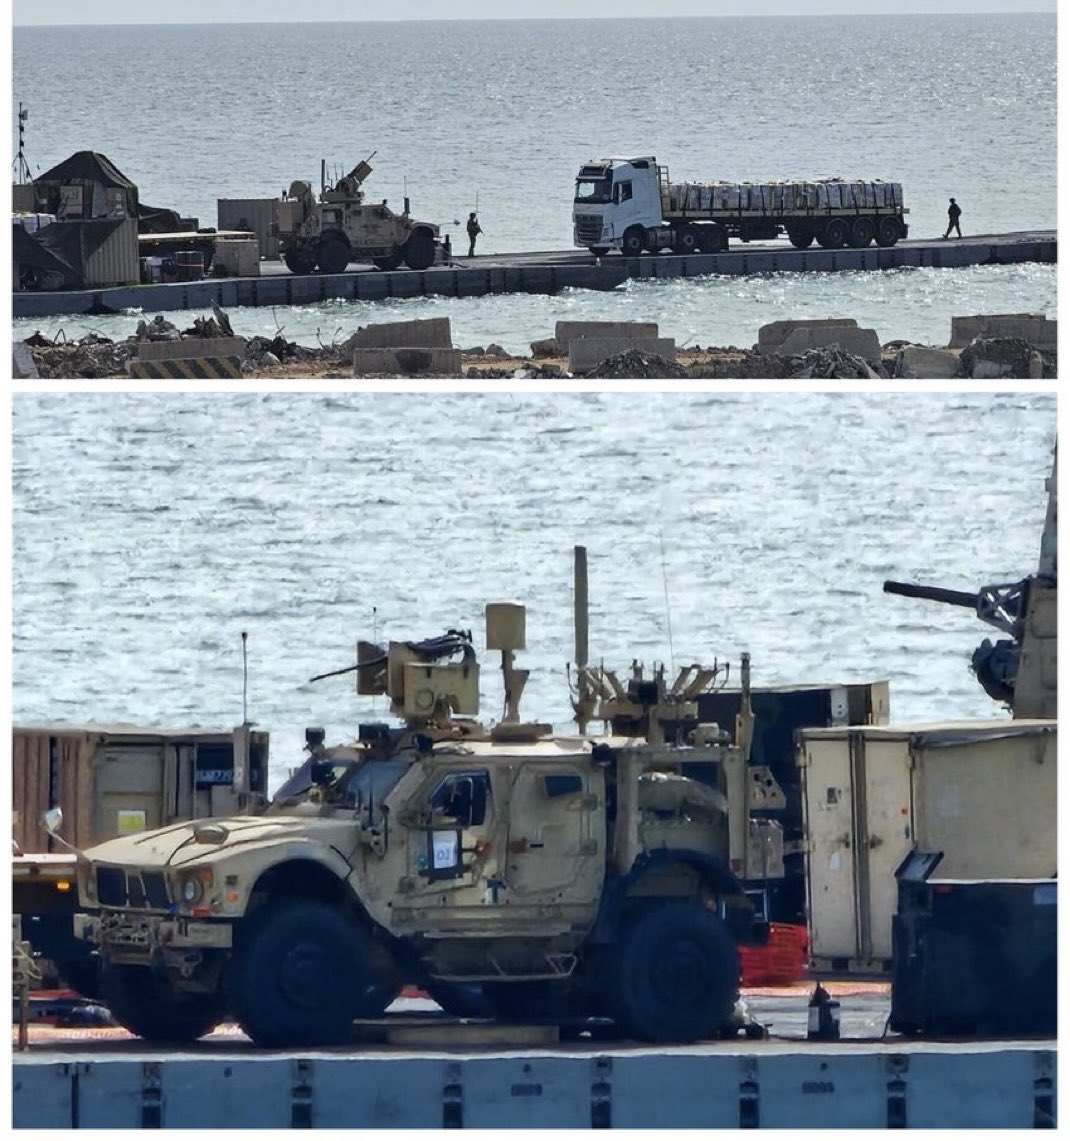 🚨Humanitarian port or military base?

The Biden Port is gradually being transformed into a military base under the guise of humanitarian purposes.

In the pictures, we see the American C-RAM air defense system protecting the floating port in the Gaza Strip.

Additionally, the